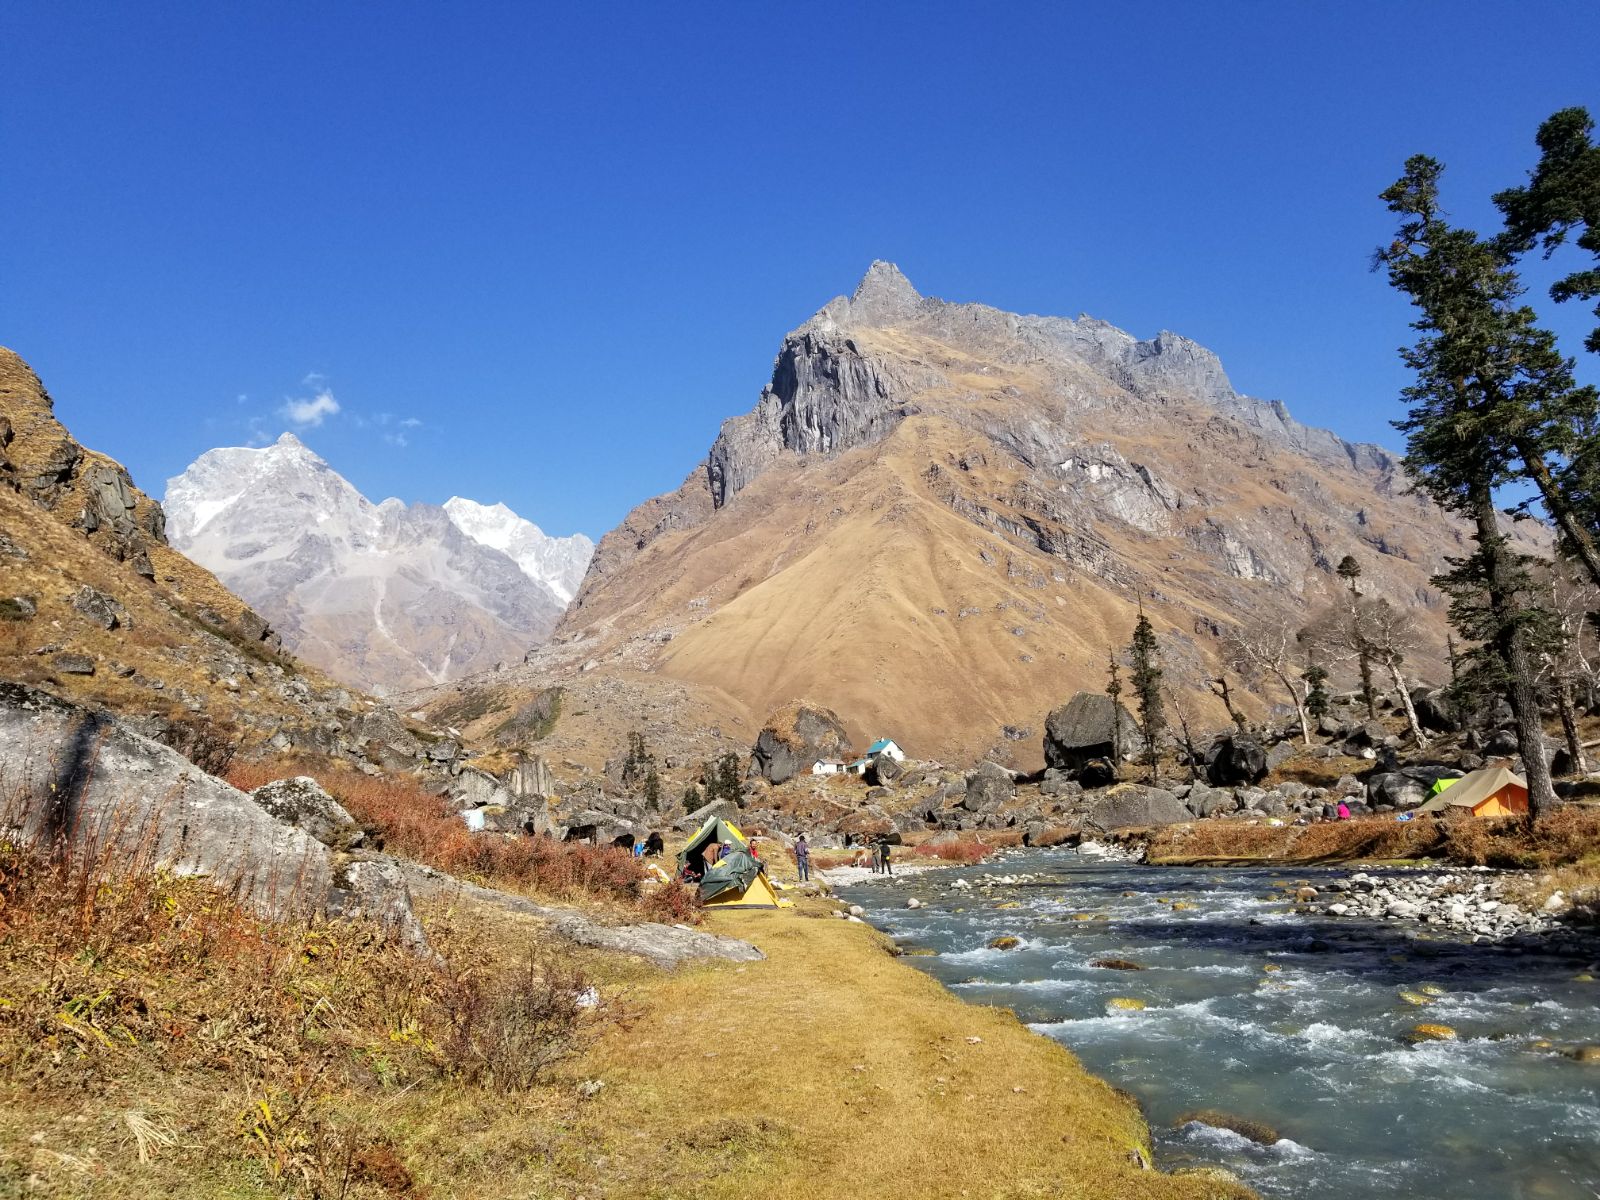 The river s song matches the beauty of the mountains. Har Ki Doon peak right Hata peak left - Himalayan Institute